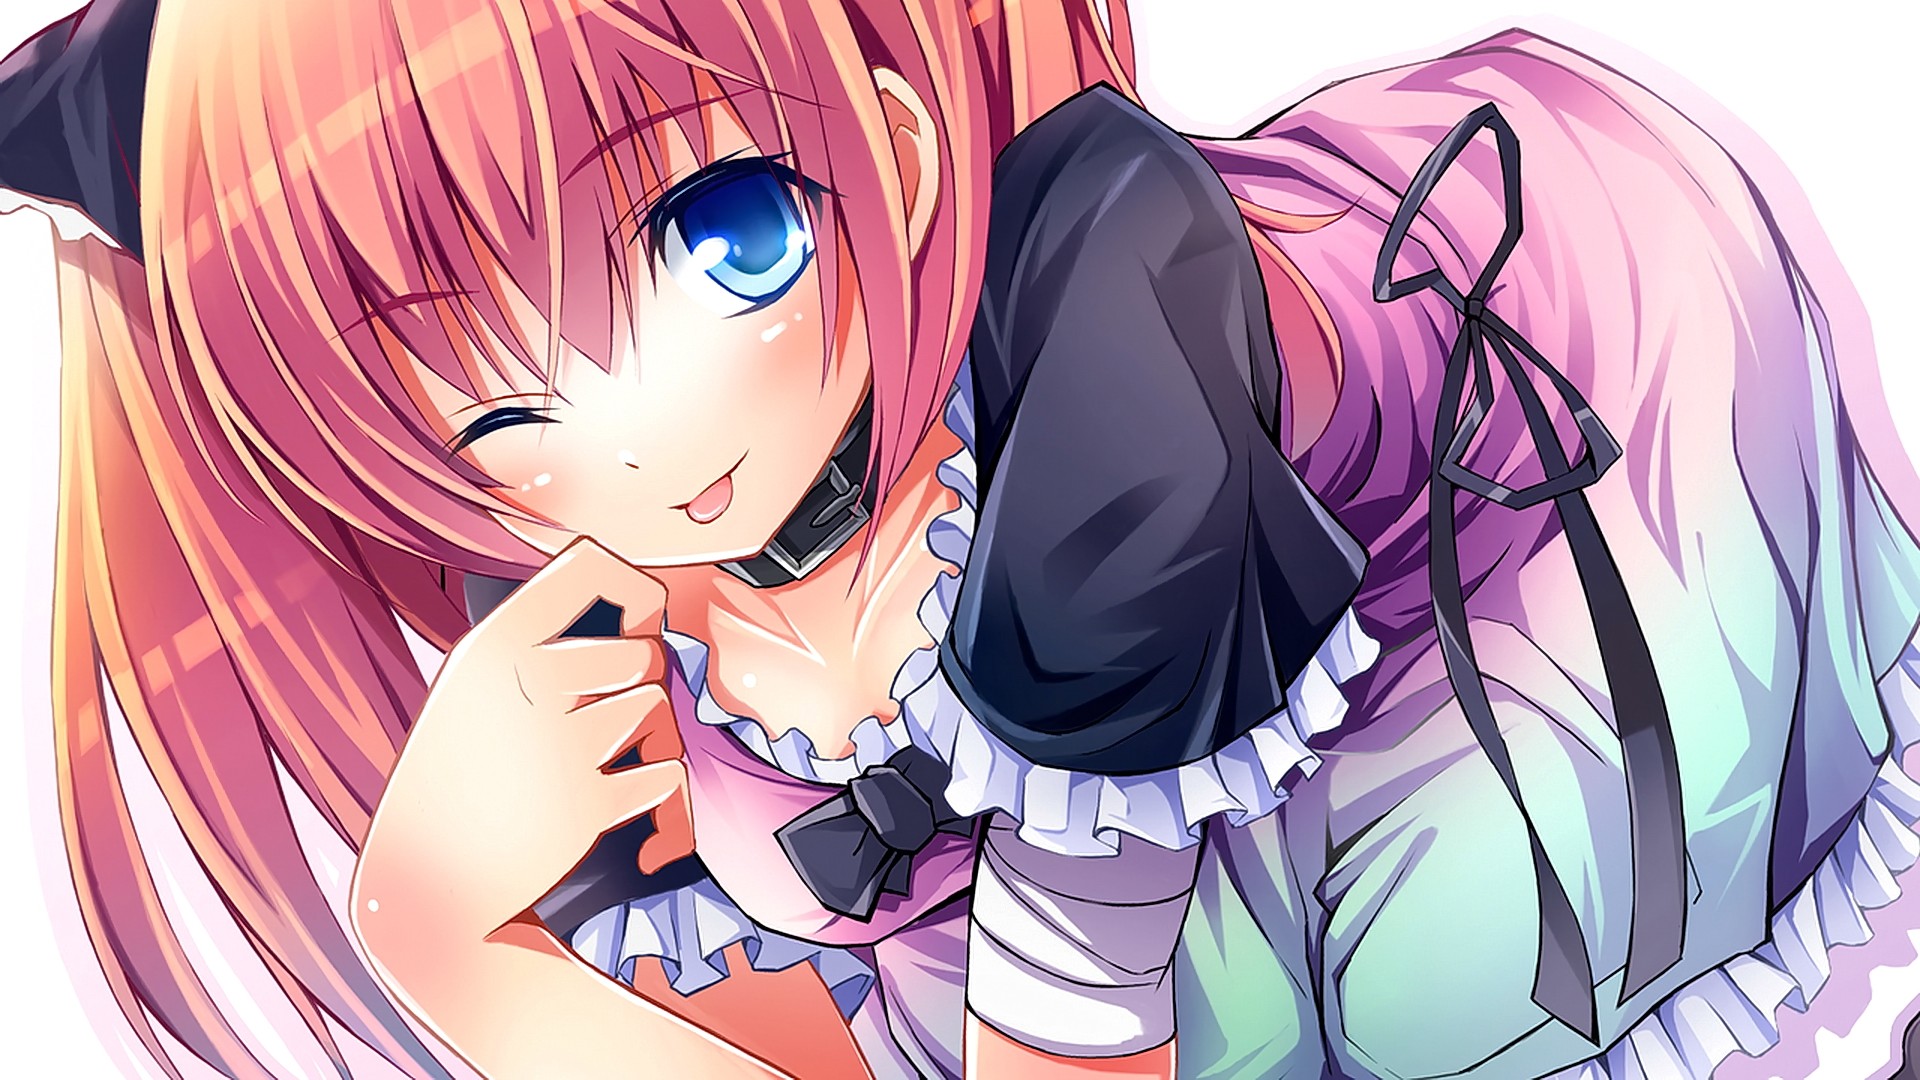 Anime 1920x1080 anime anime girls blue eyes wink tongue out dress artwork Chiri tongues one eye closed face closeup long hair redhead looking at viewer